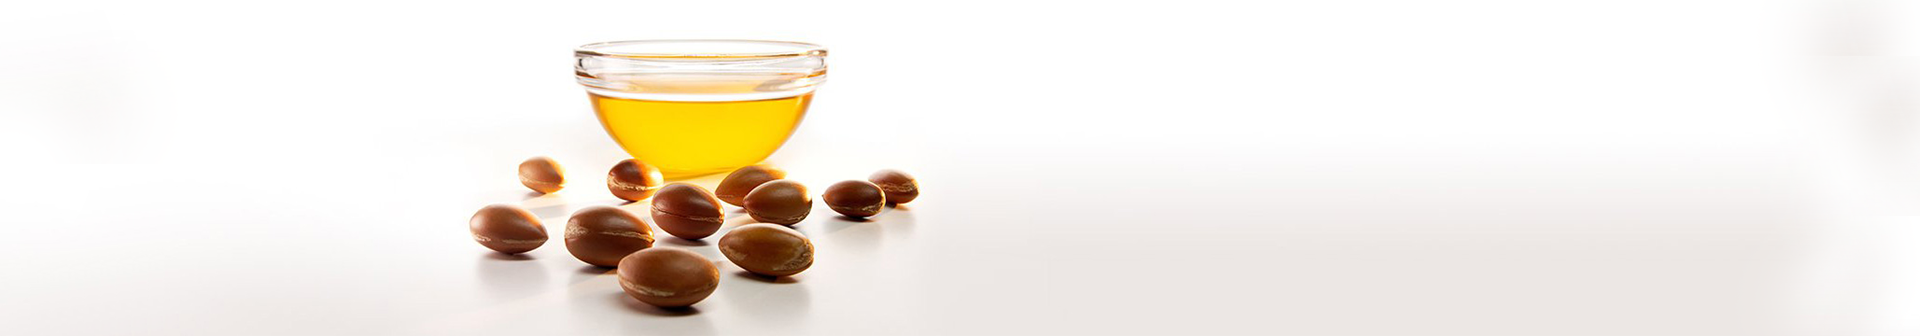 argan-oil-and-why-it-is-so-sought-after-big